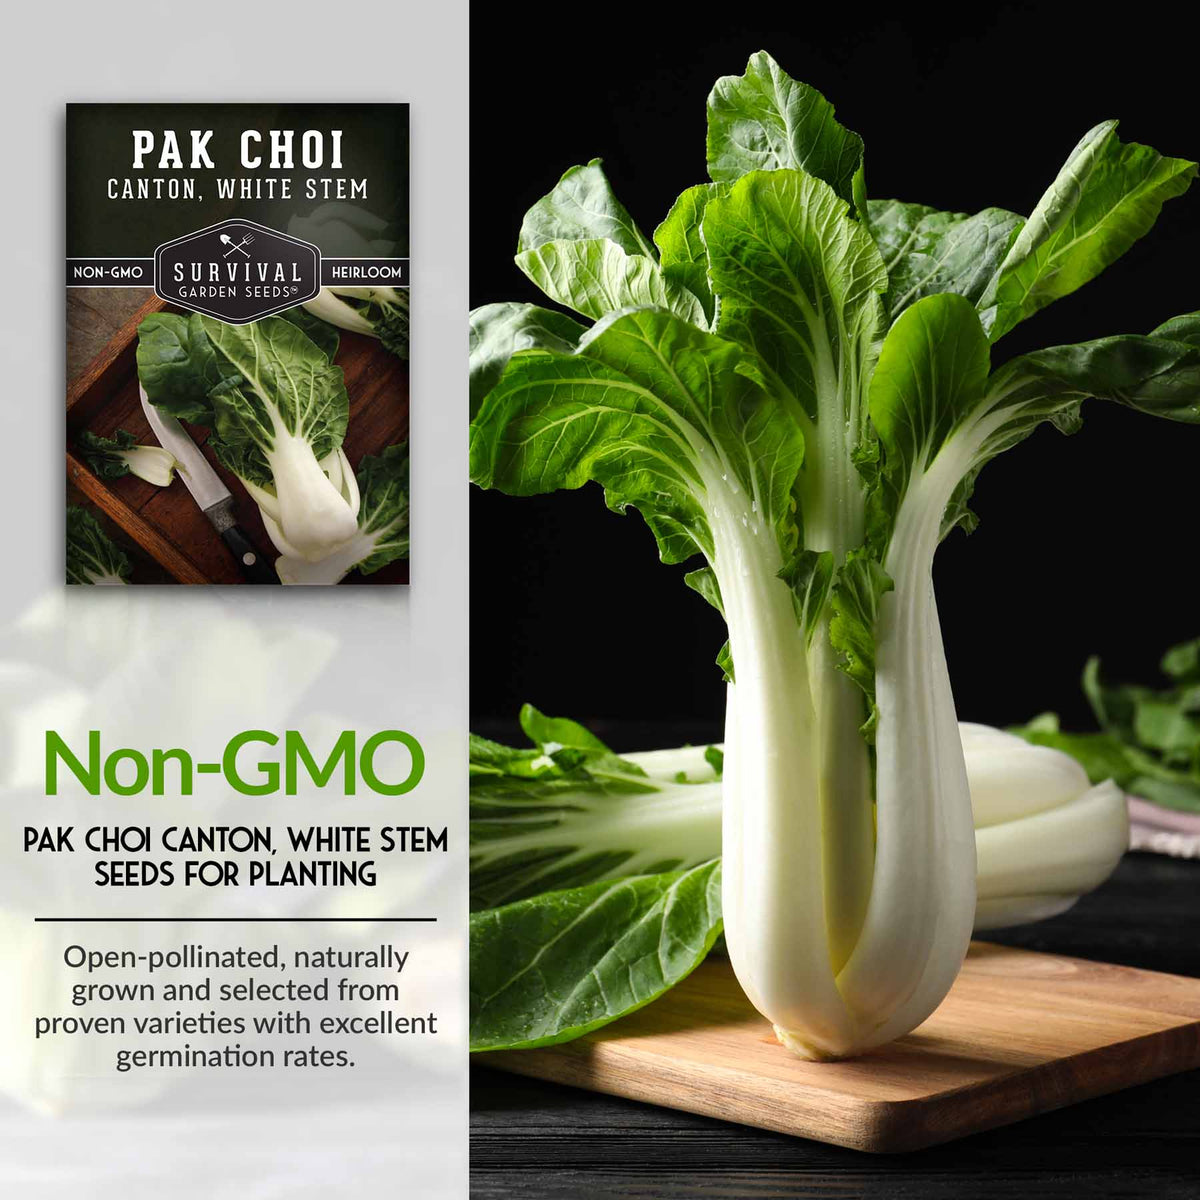 Non-GMO Pak Choi Seeds for Planting